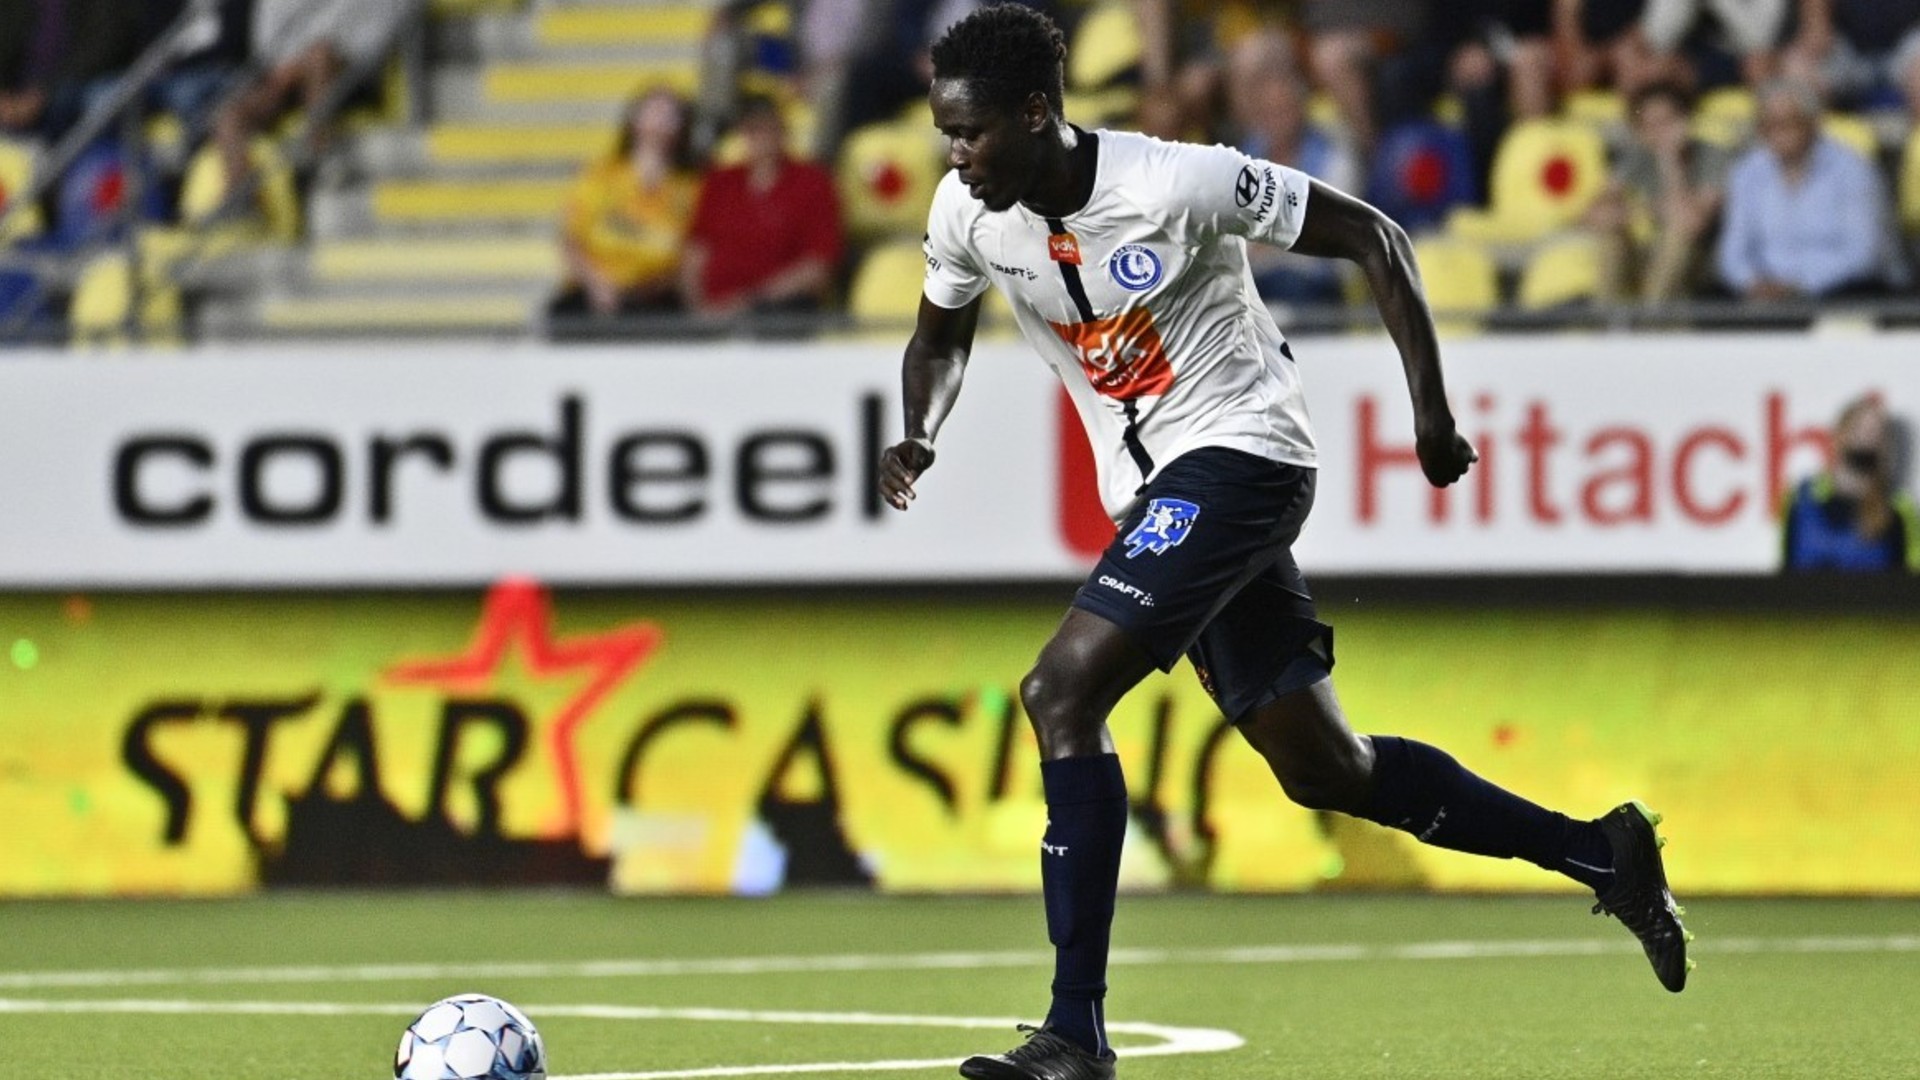 It Was A Disappointing Debut Okumu Gutted As Kaa Gent Lose To Sint Truidense Vv Goal Com